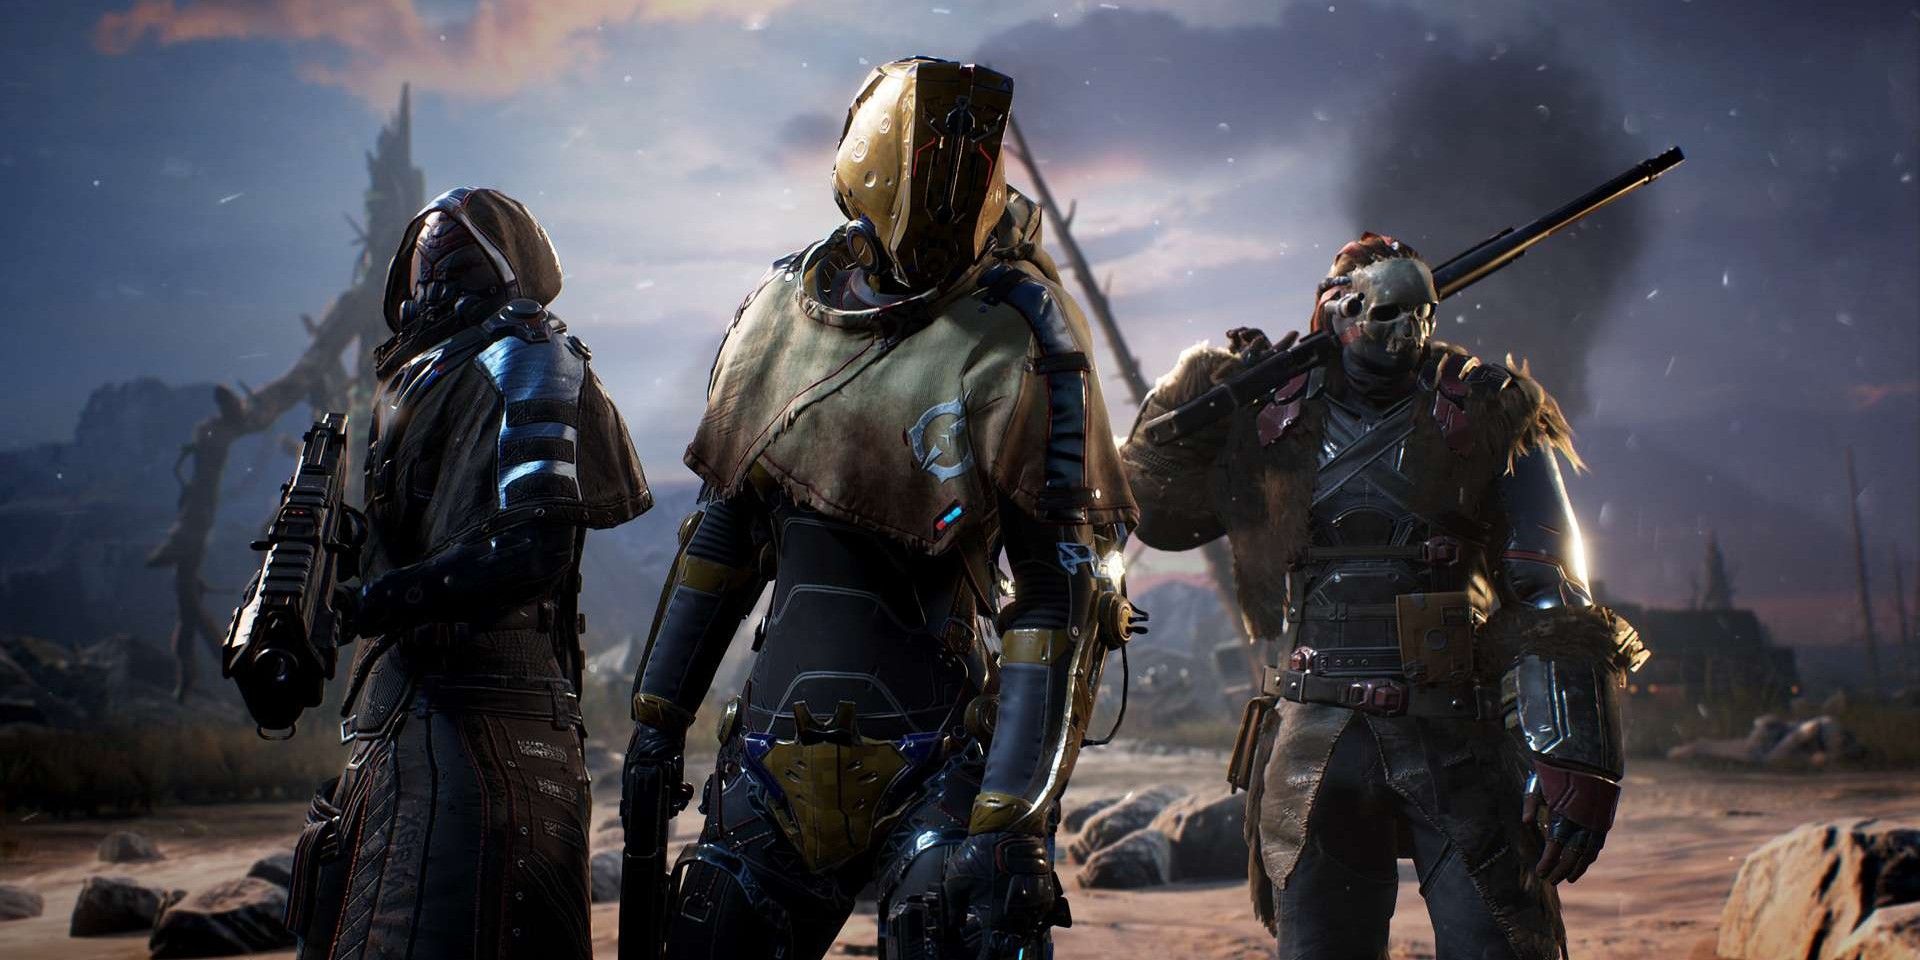 An image of warriors standing on a wasteland in Outriders gameplay